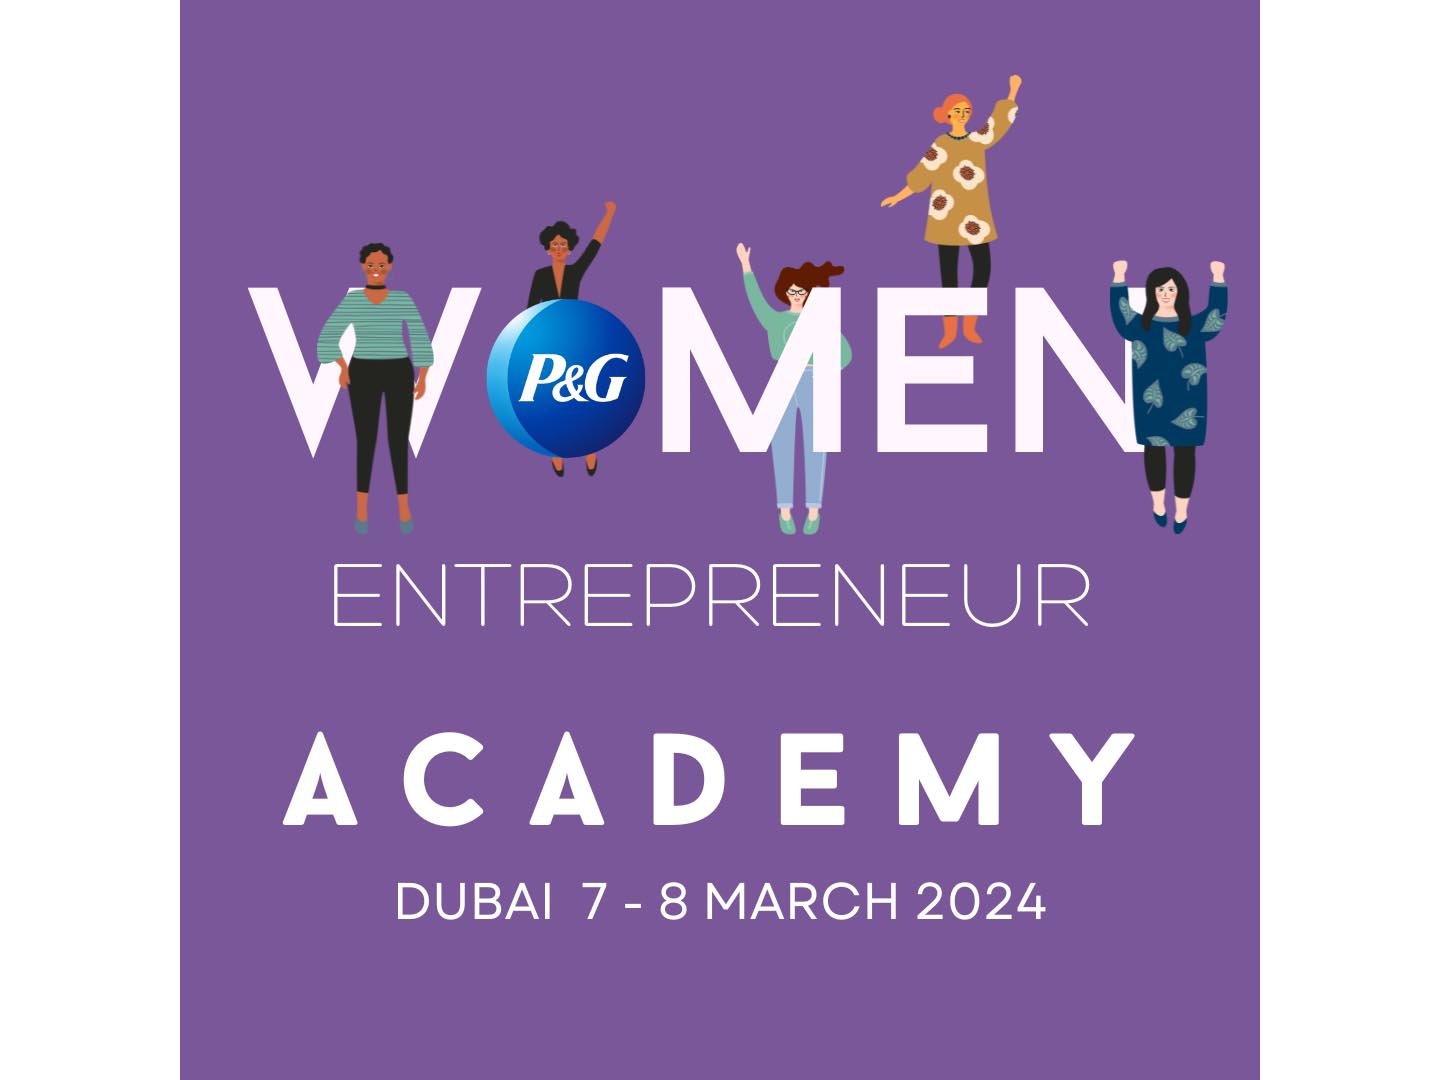 P&G committed to Equality & Inclusion with launch of third edition of Women Entrepreneurs Academy 